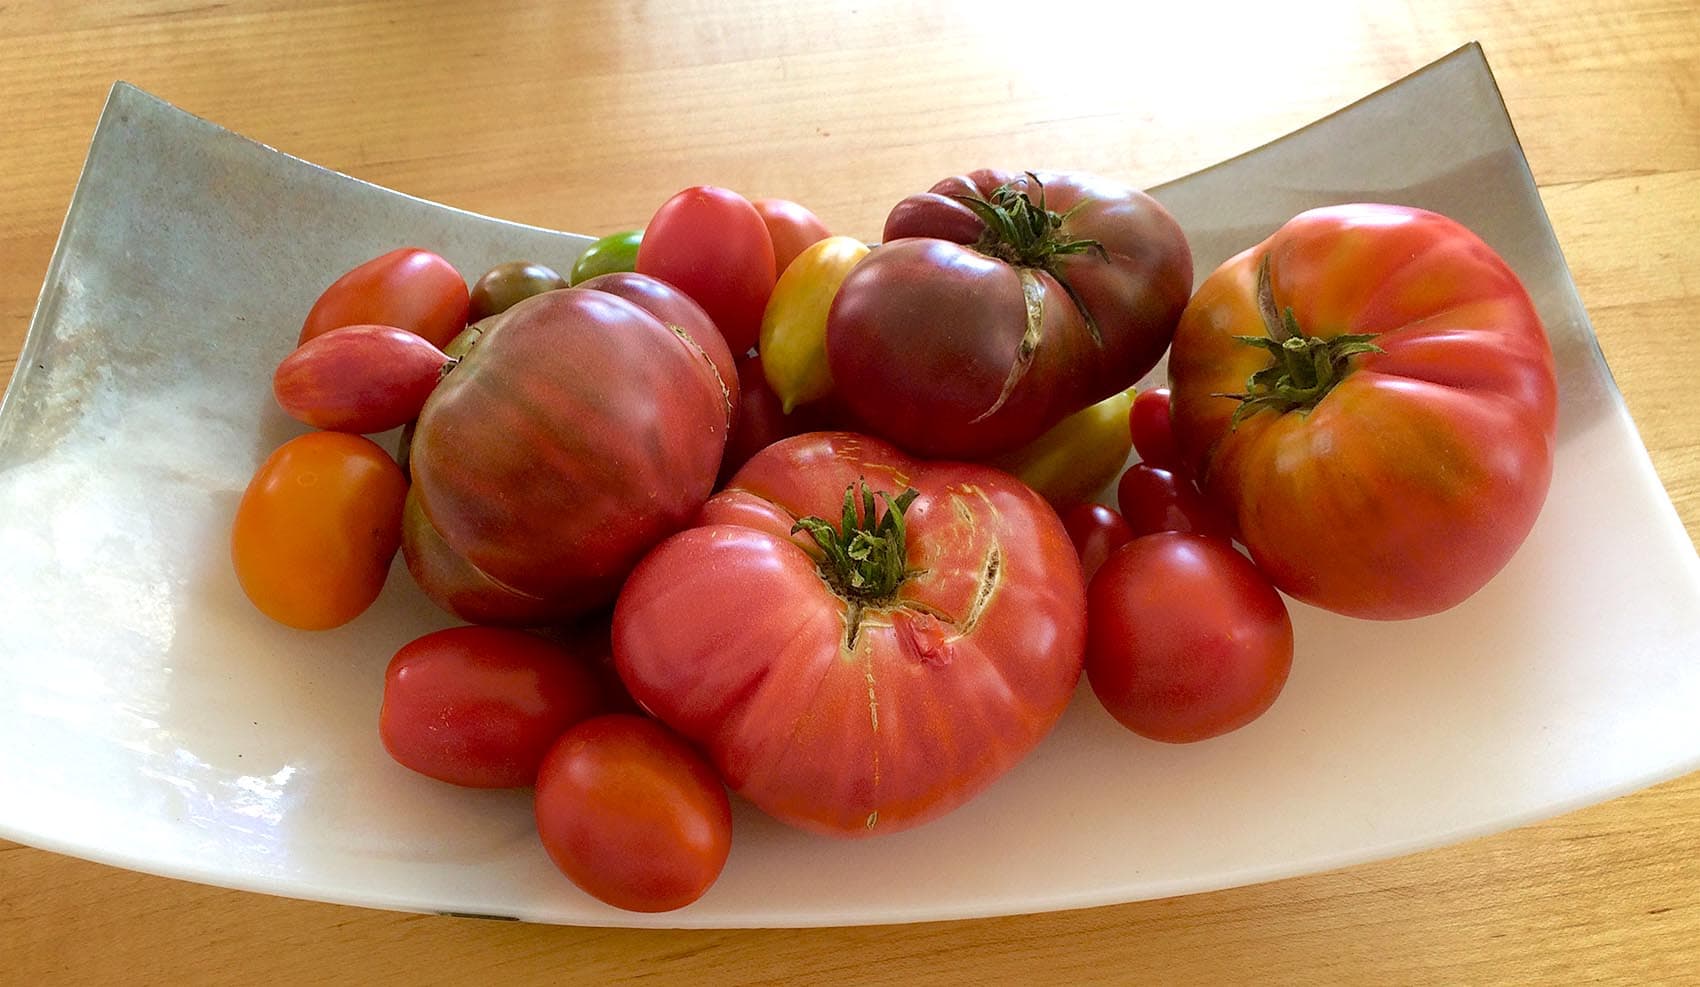 Fresh tomatoes from Kathy's garden. (Kathy Gunst for Here & Now)